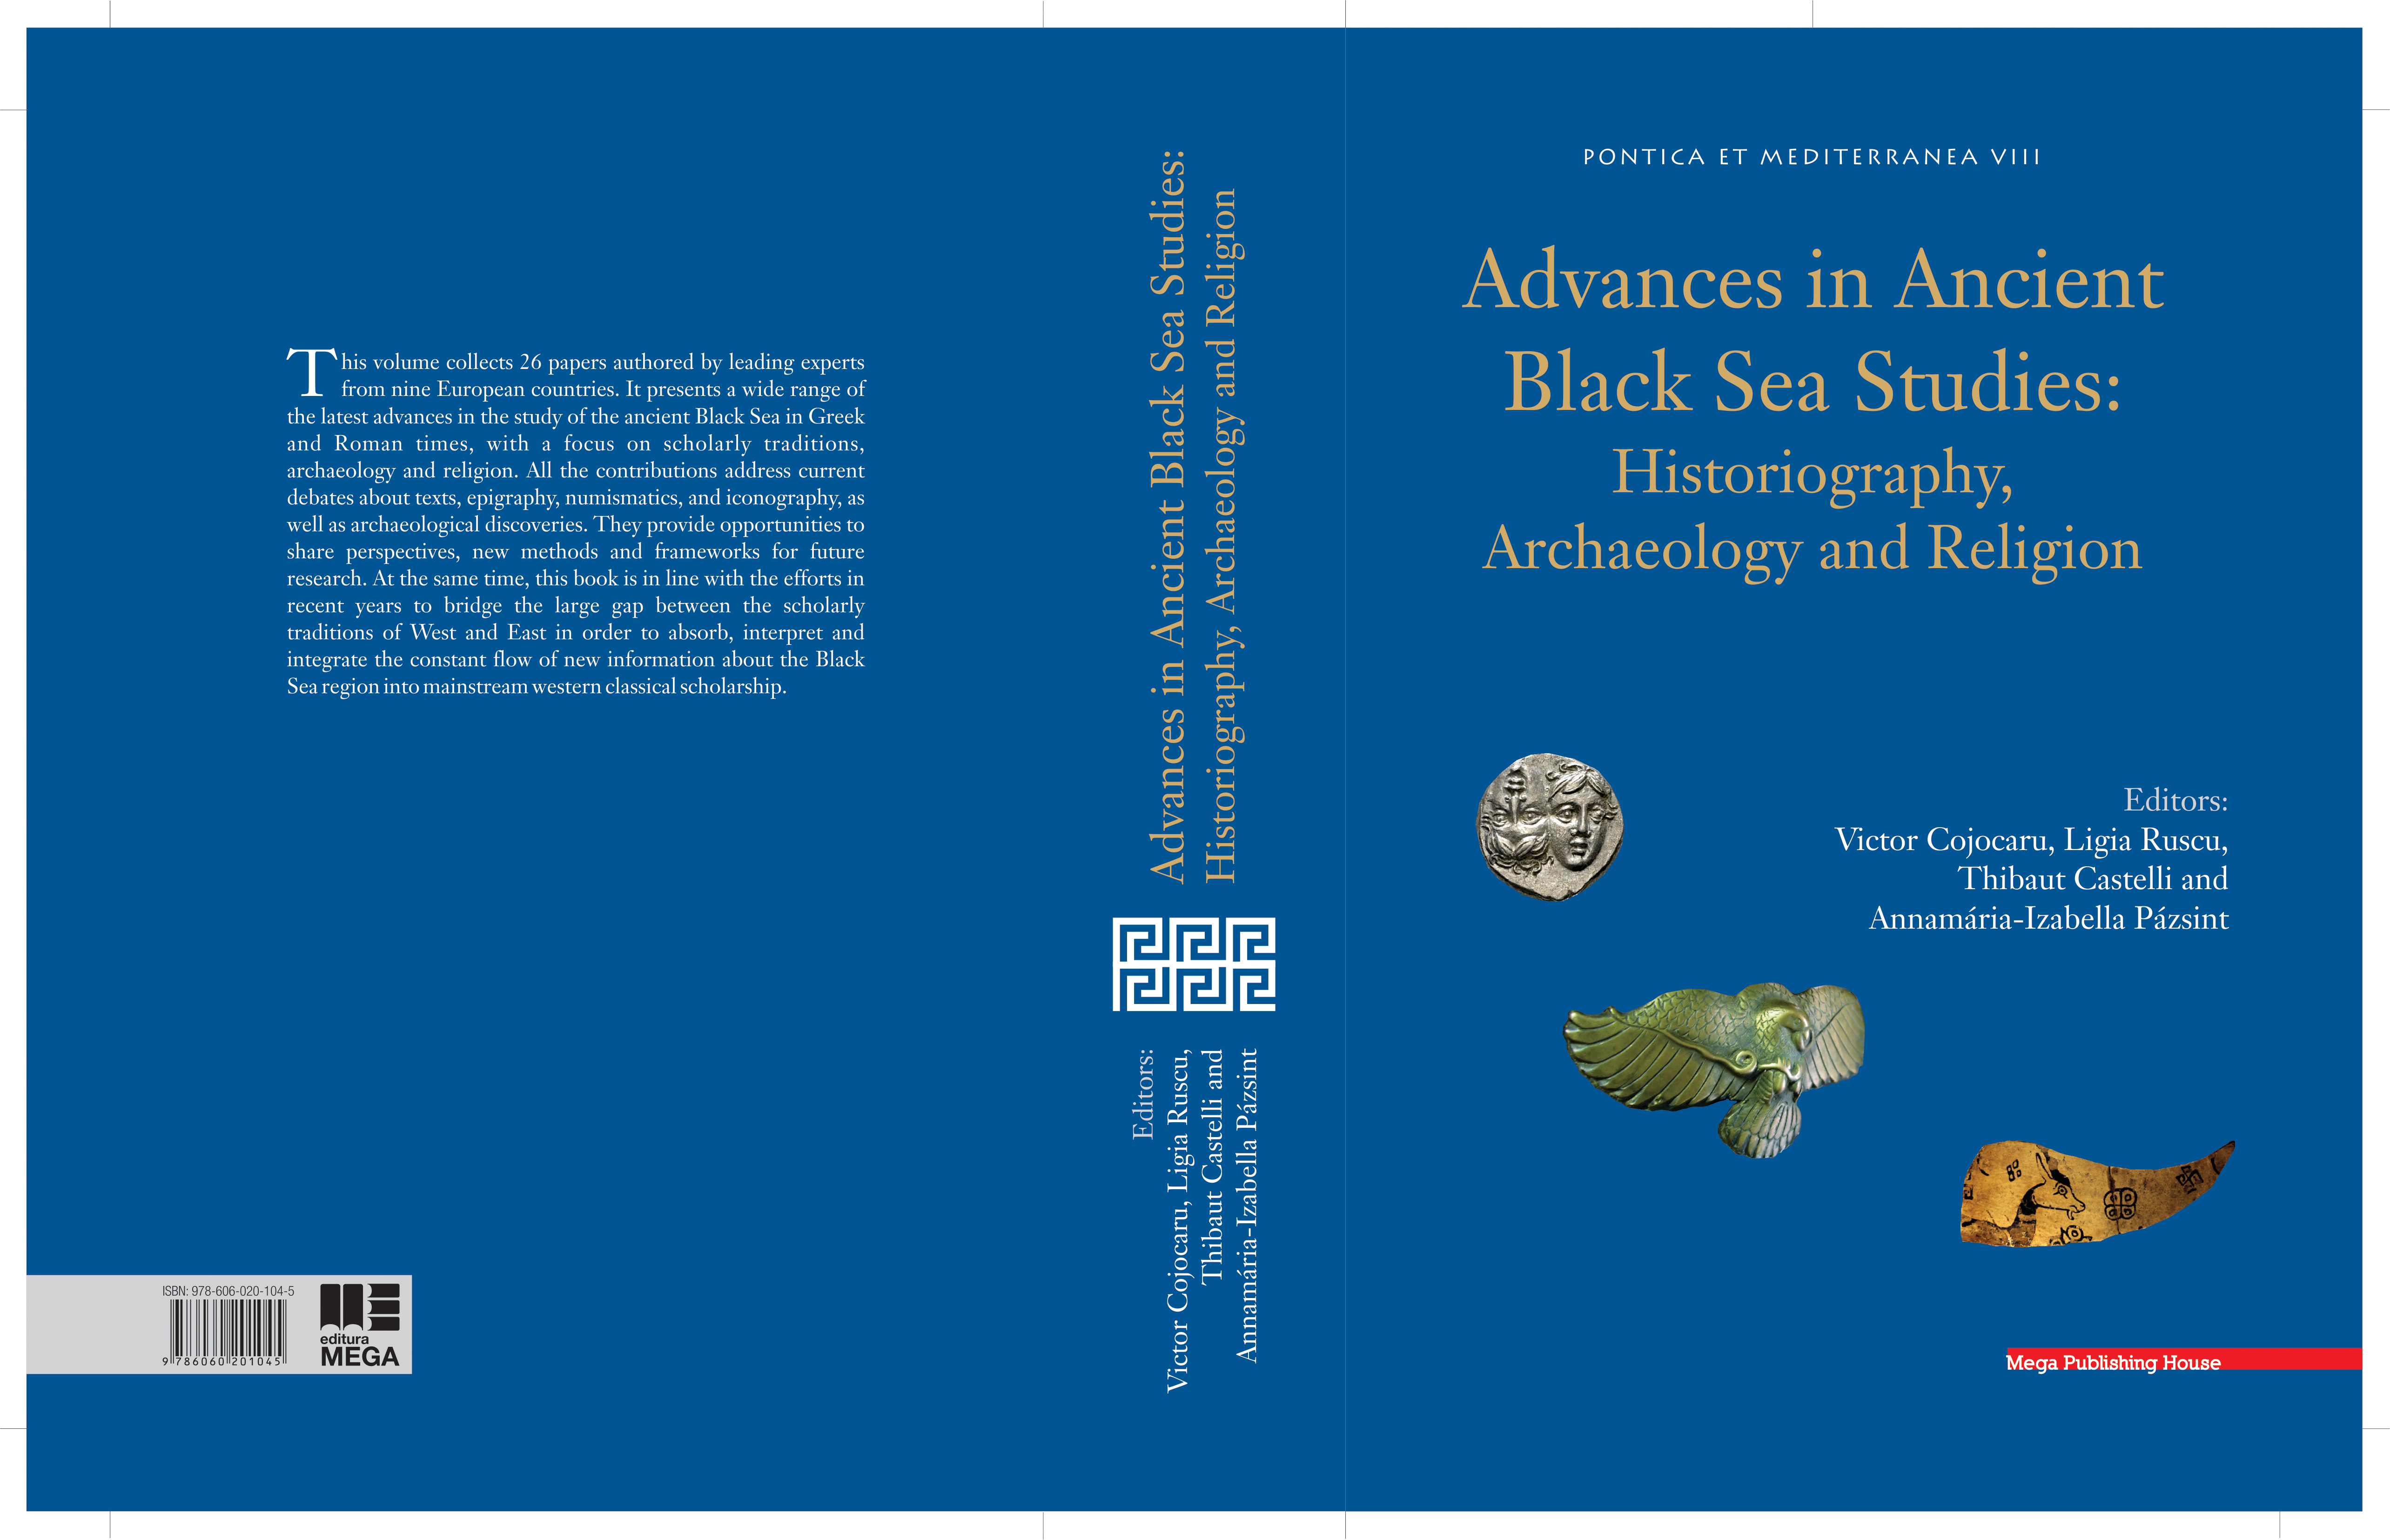 Advances in Ancient Black Sea Studies: Historiography, Archaeology and Religion. The Proceedings of the International Symposium, Constanţa, August 20-24, 2018